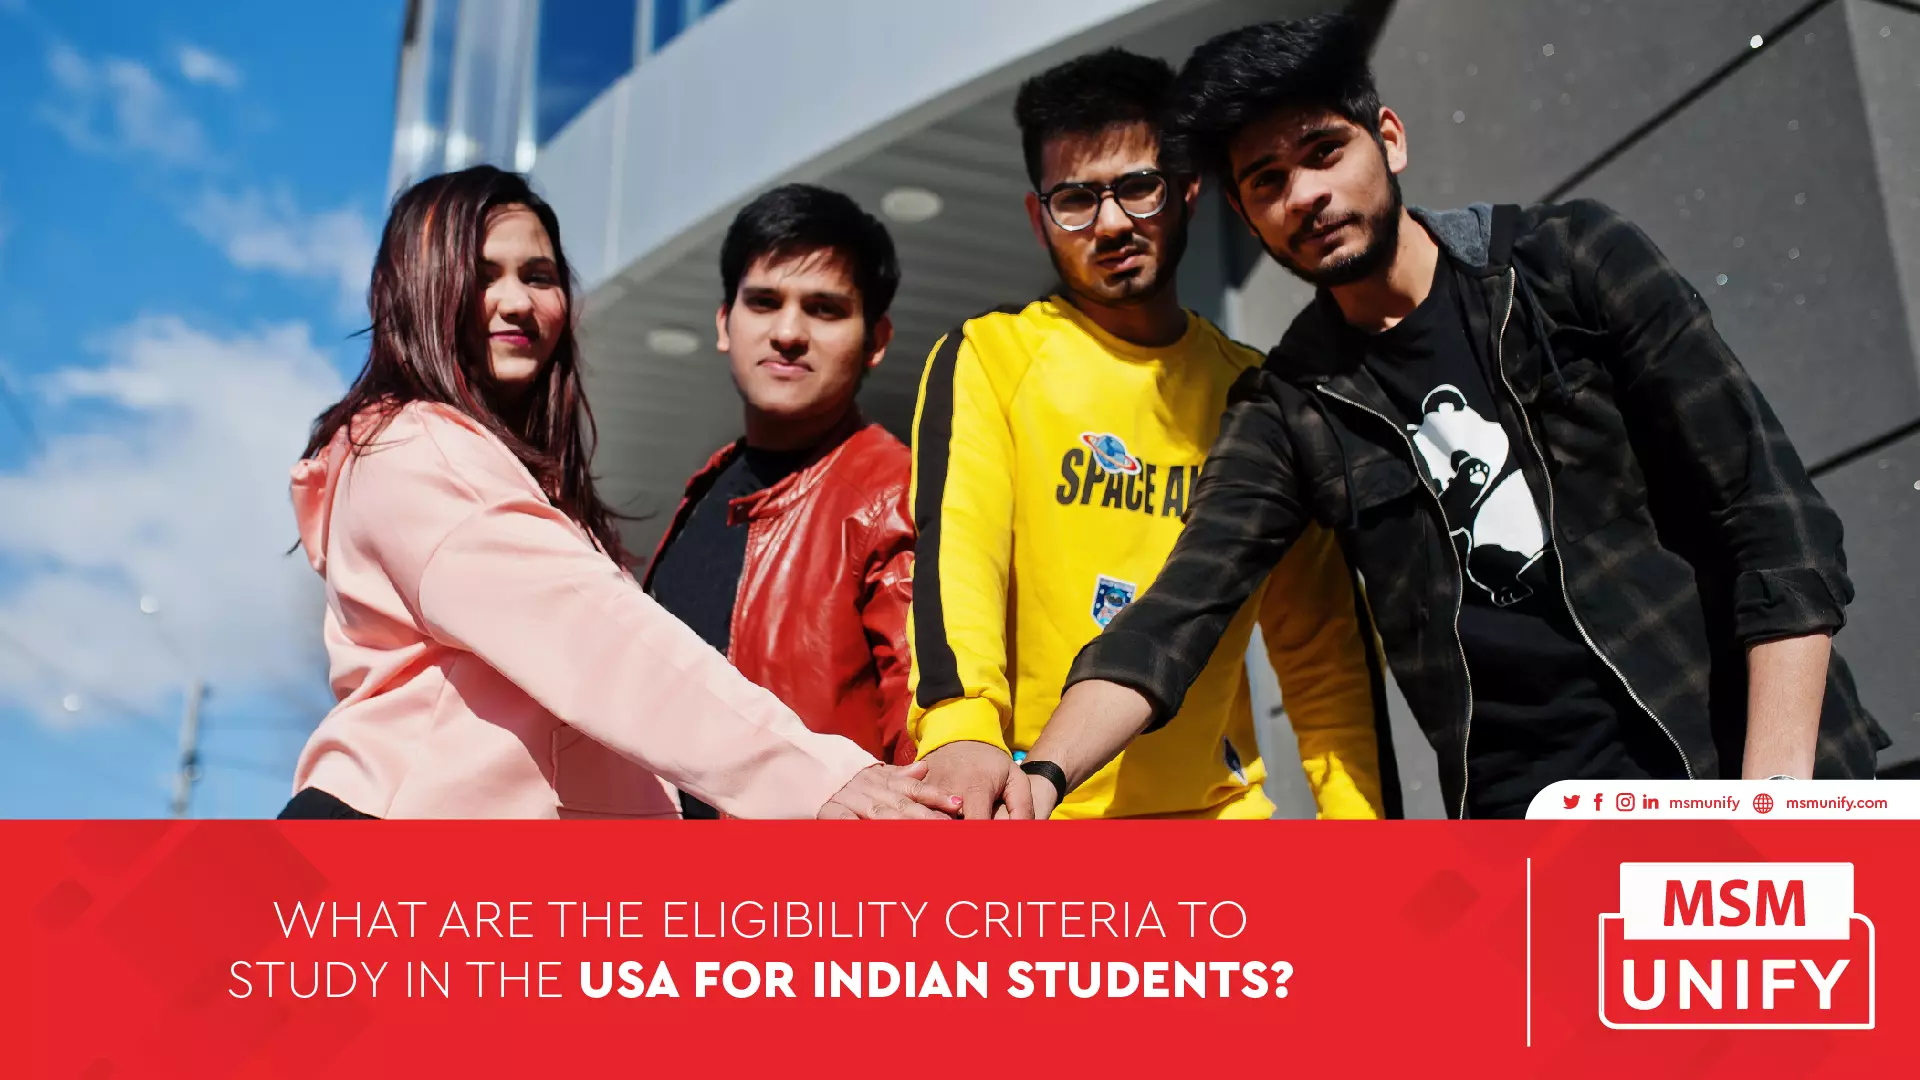 112322 MSM Unify What Are the Eligibility Criteria to Study in the USA for Indian Students 01